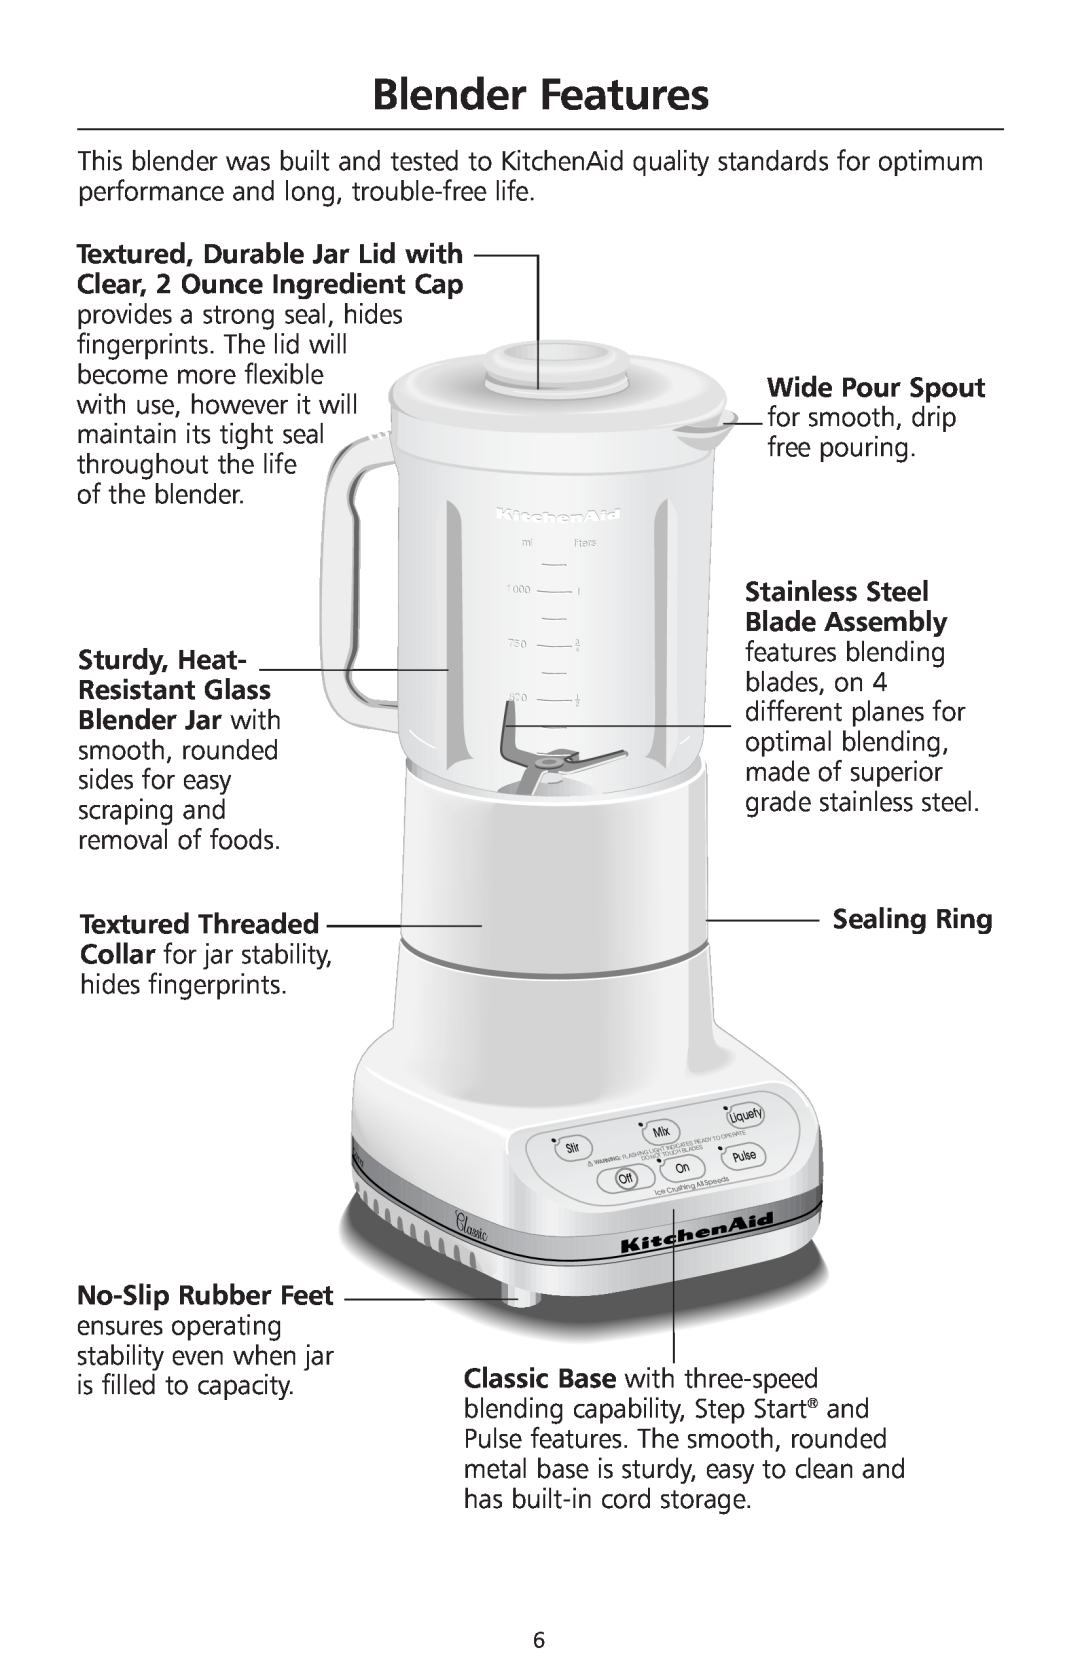 KitchenAid 3 Speed Classic Blender manual Blender Features 